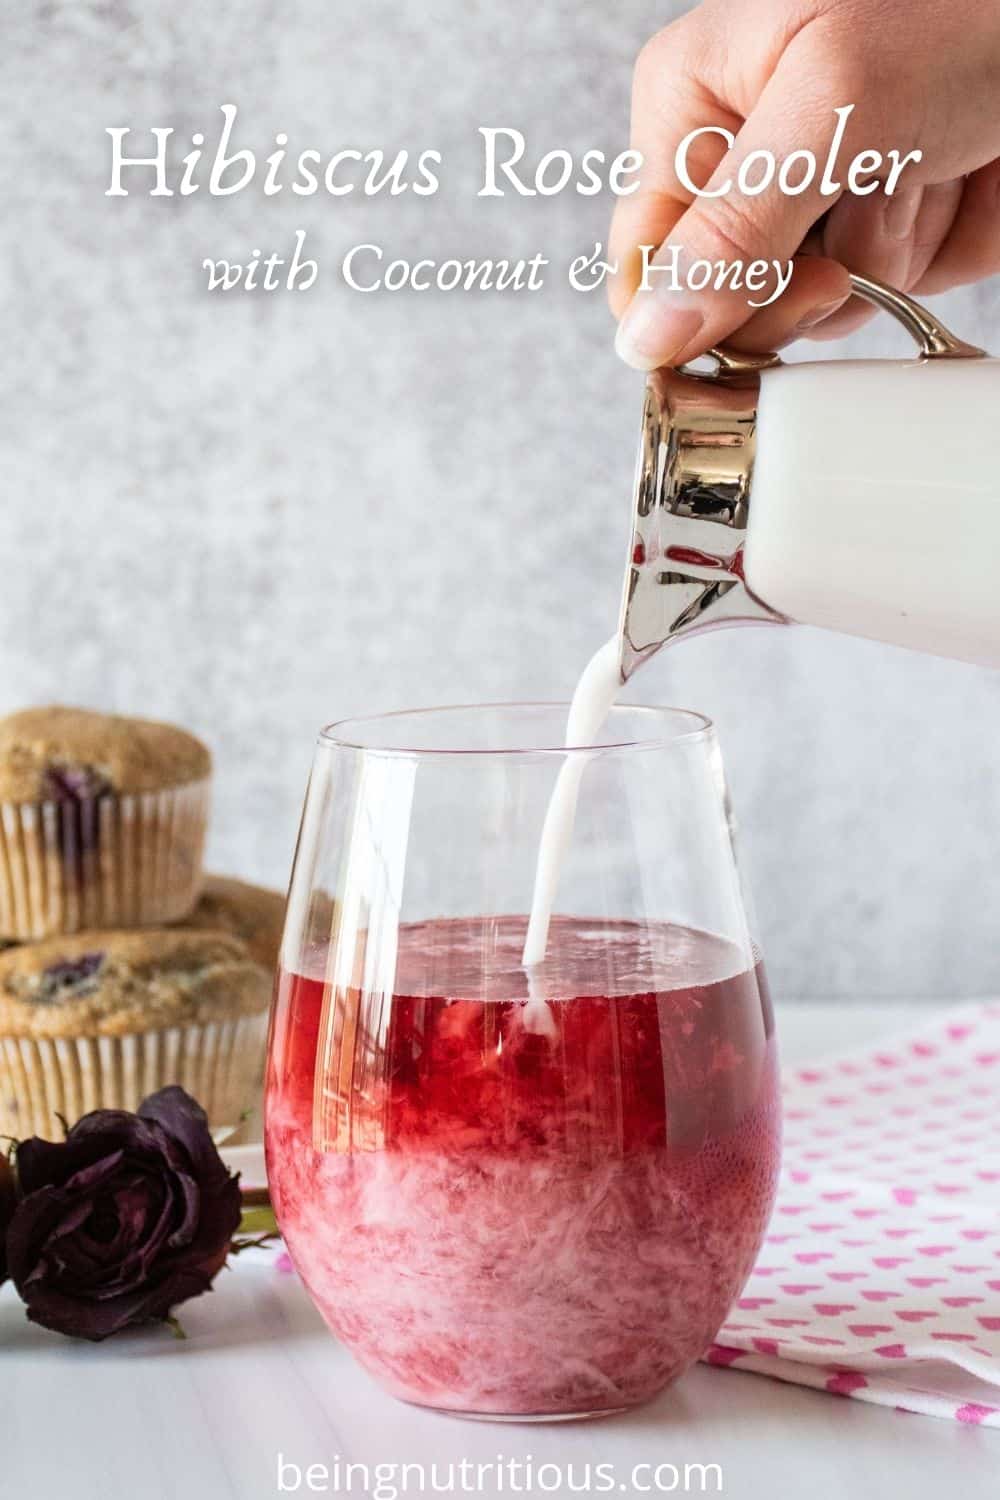 Glass of red tea with coconut milk being poured in. Text overlay: Hibiscus Rose Cooler with Coconut & Honey.